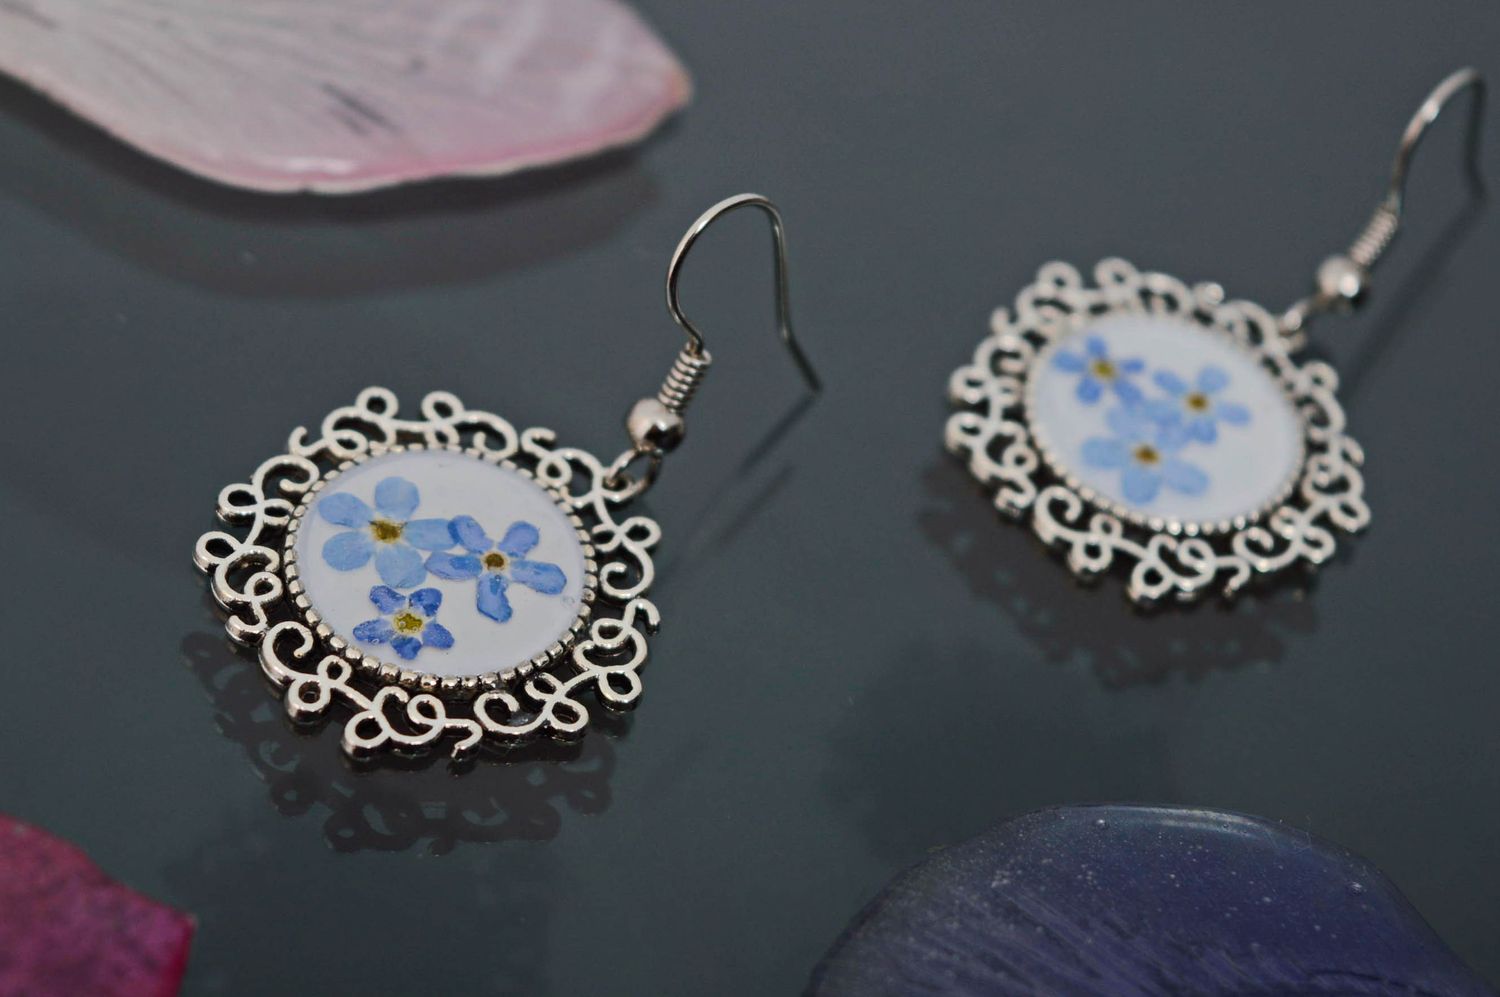 Vintage earrings with forget-me-not flowers coated with epoxy resin photo 1